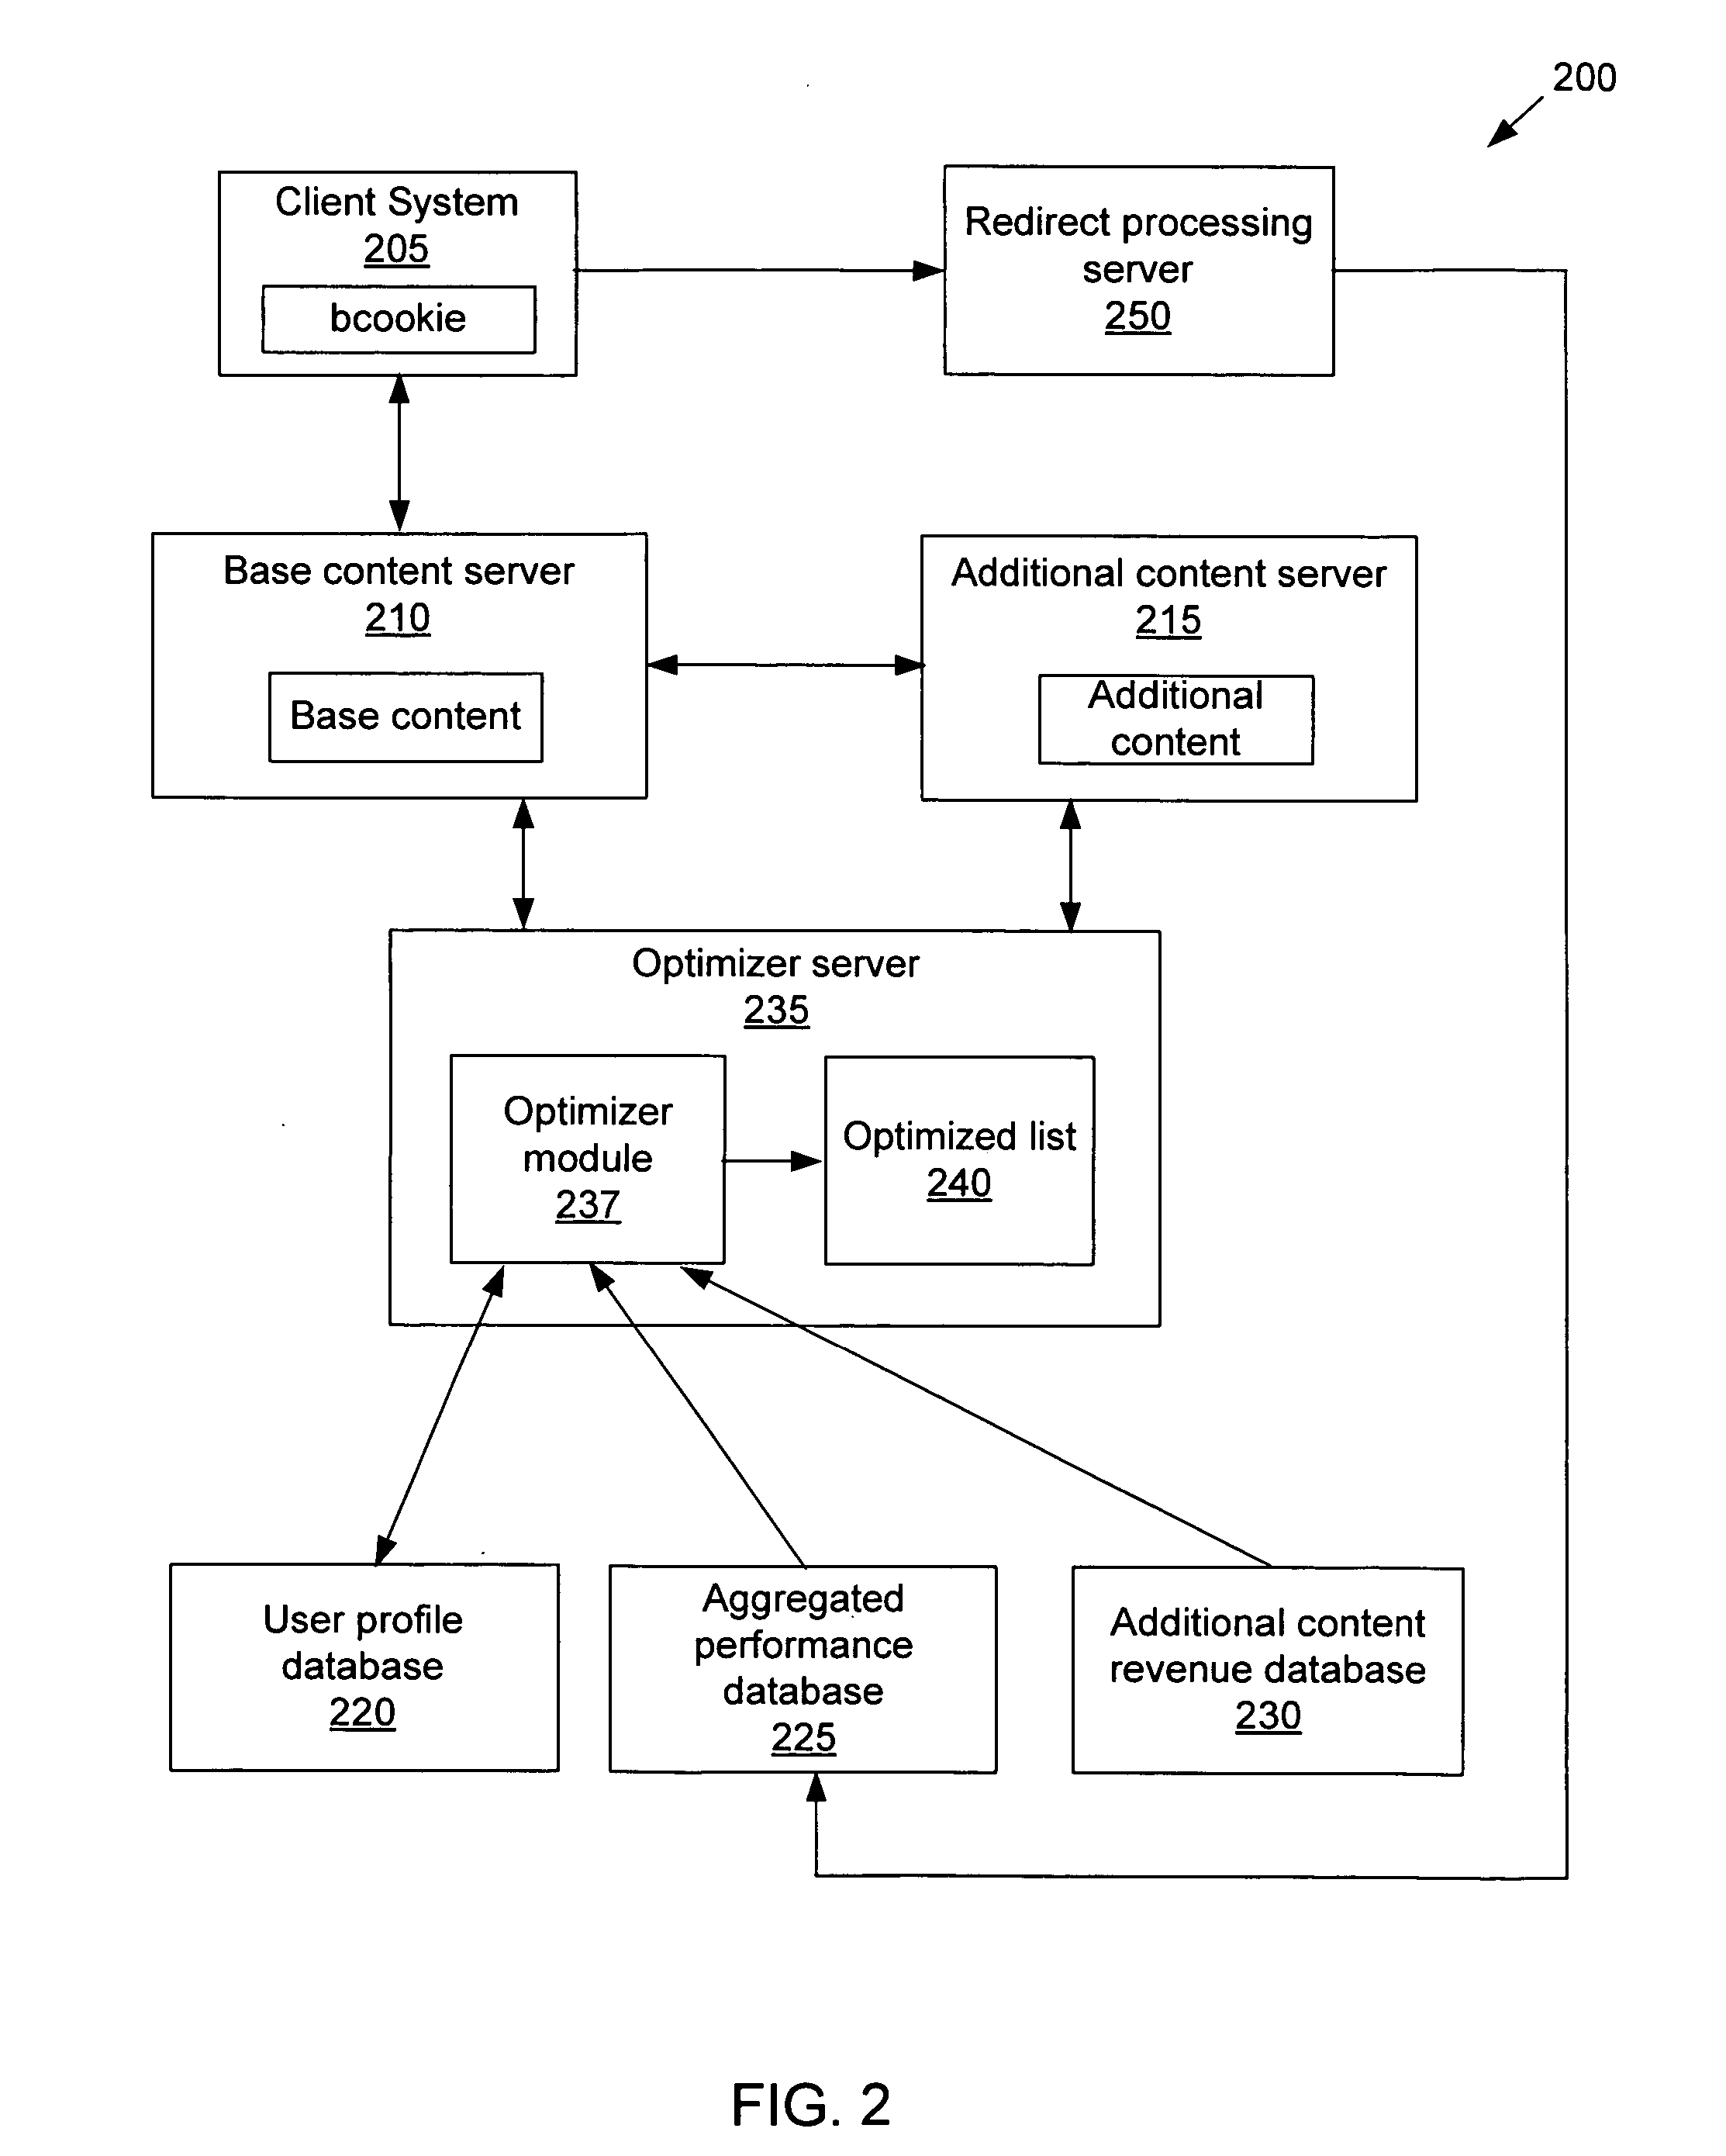 Method and apparatus for selecting advertisements to serve using user profiles, performance scores, and advertisement revenue information